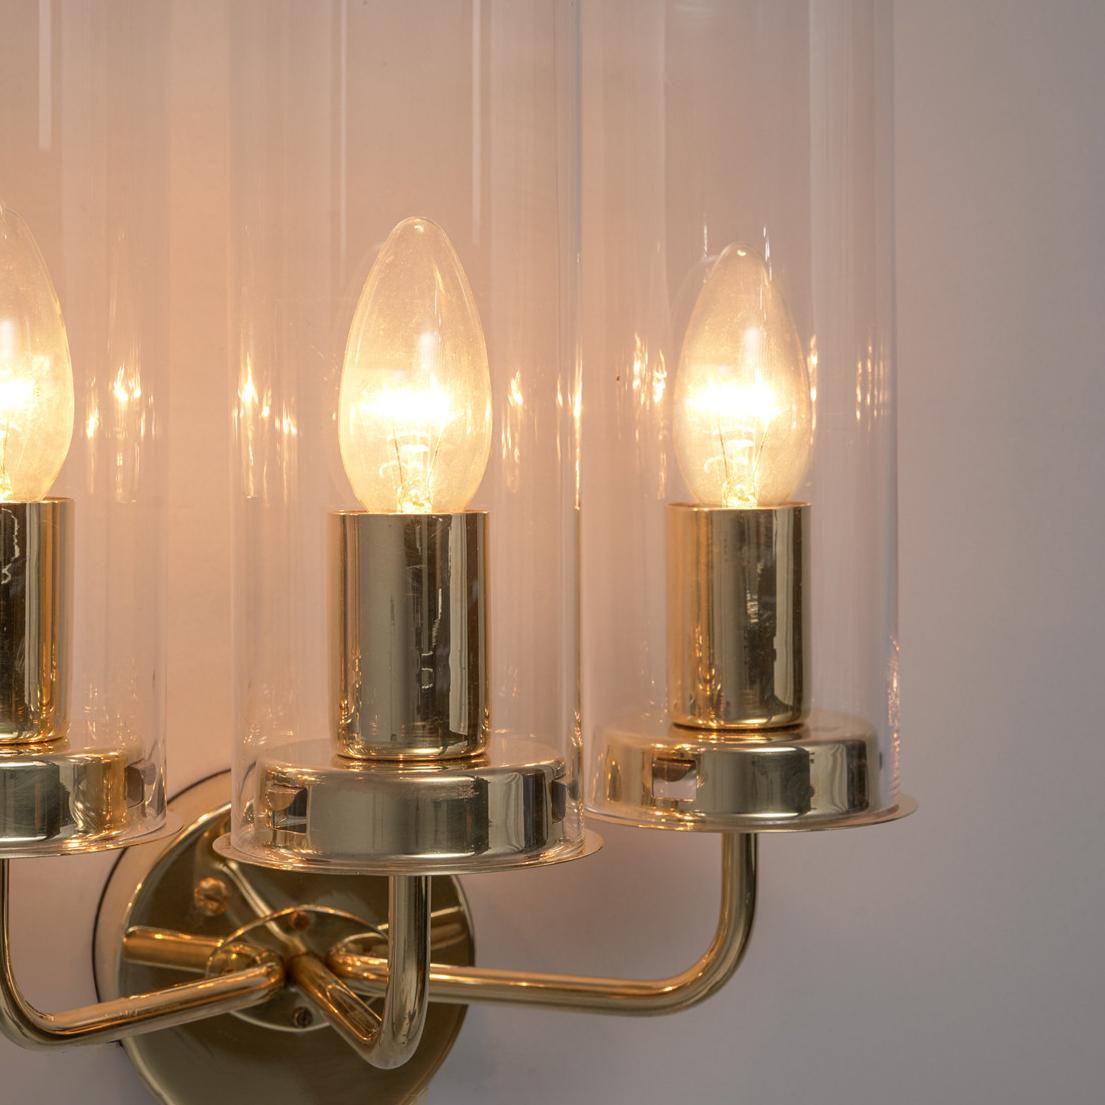 Hans-Agne Jakobsson 'Sonata' Wall Lights in Glass and Brass